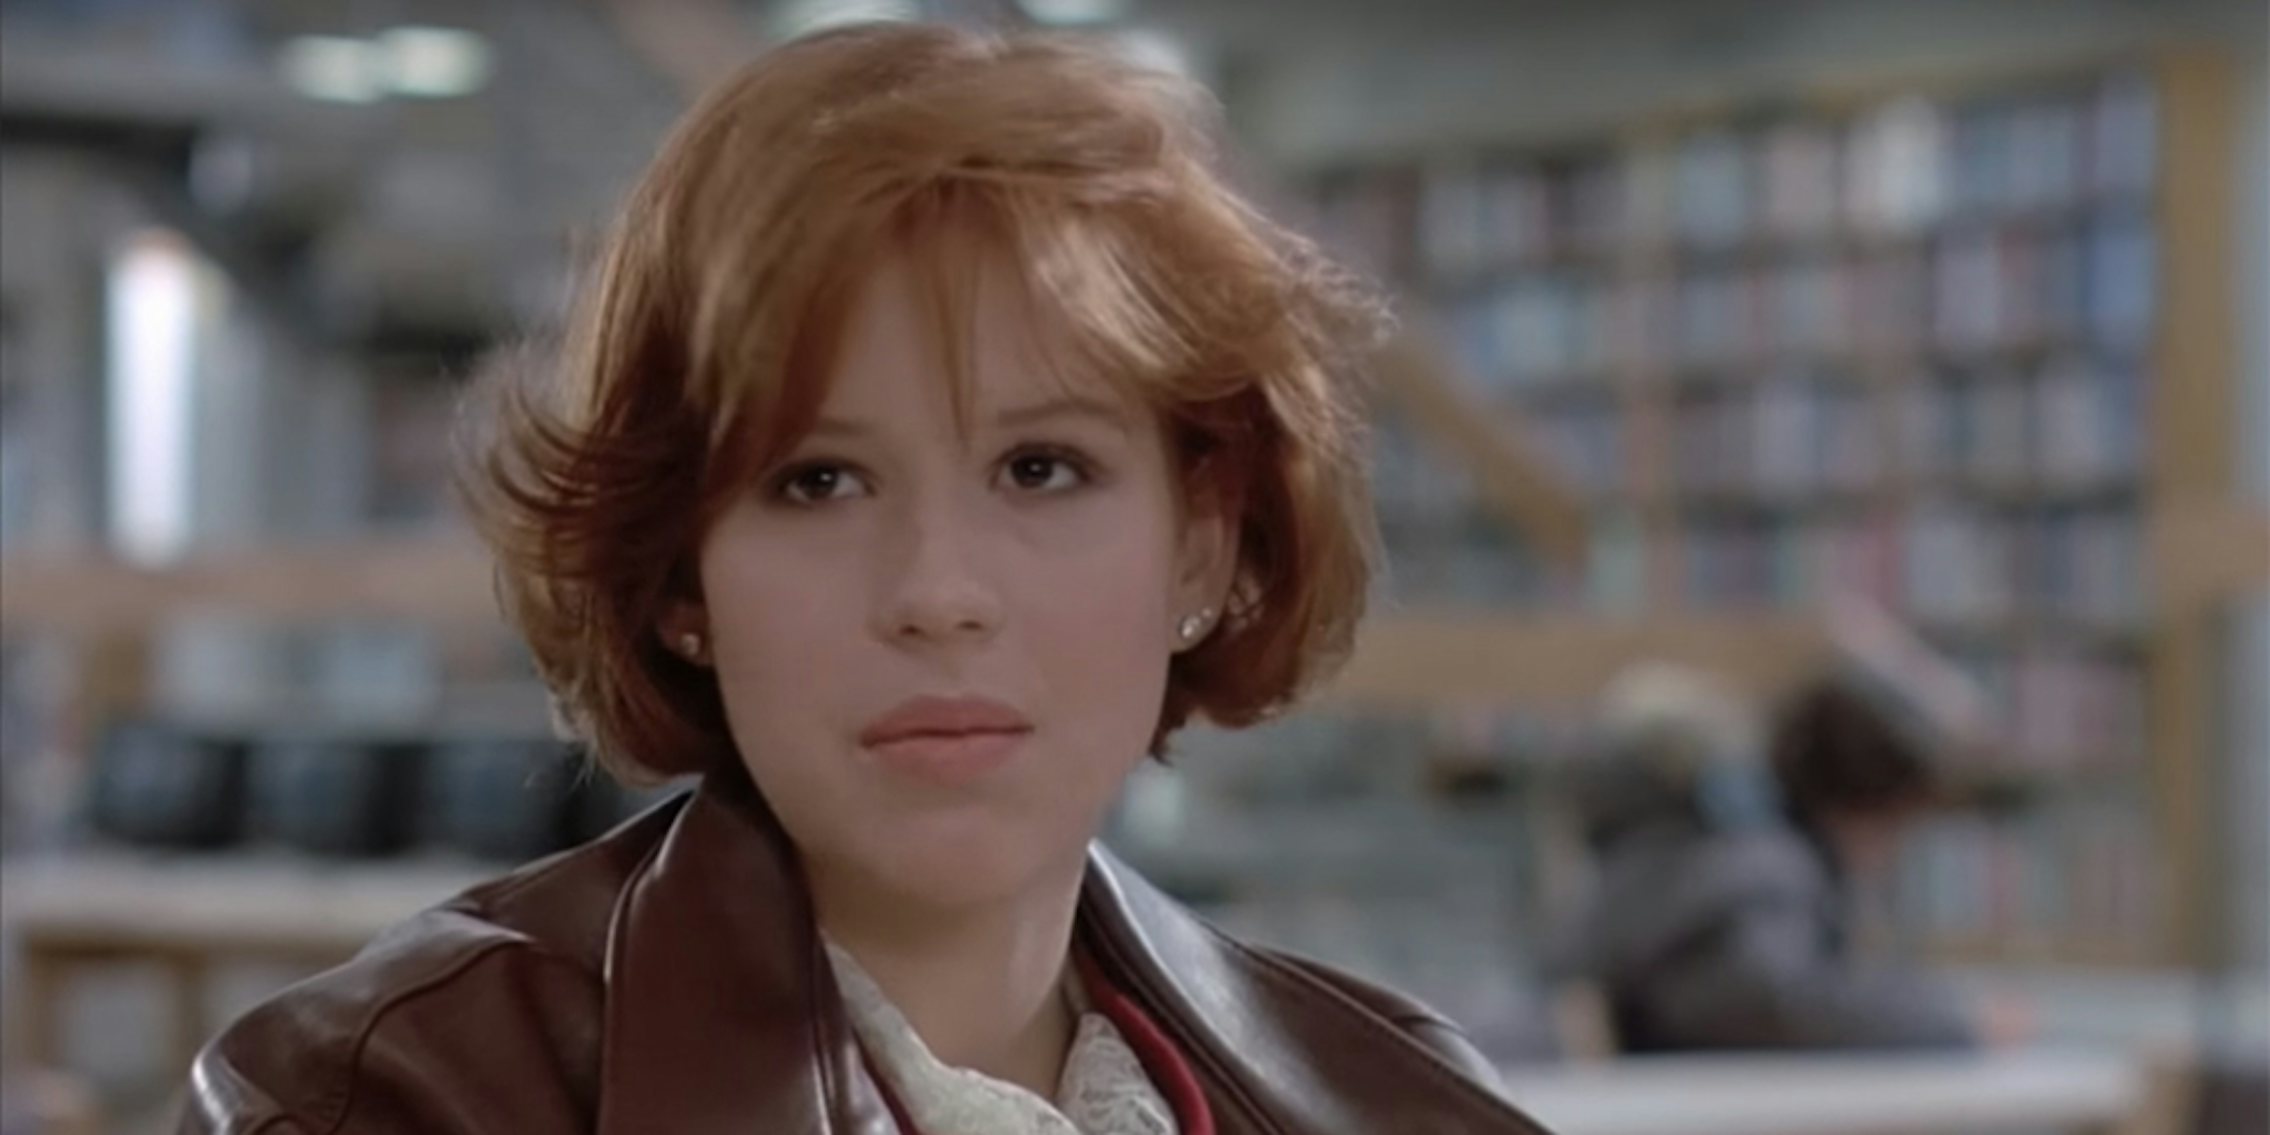 Molly Ringwald analyzed John Hughes' films in light of the #MeToo movement.